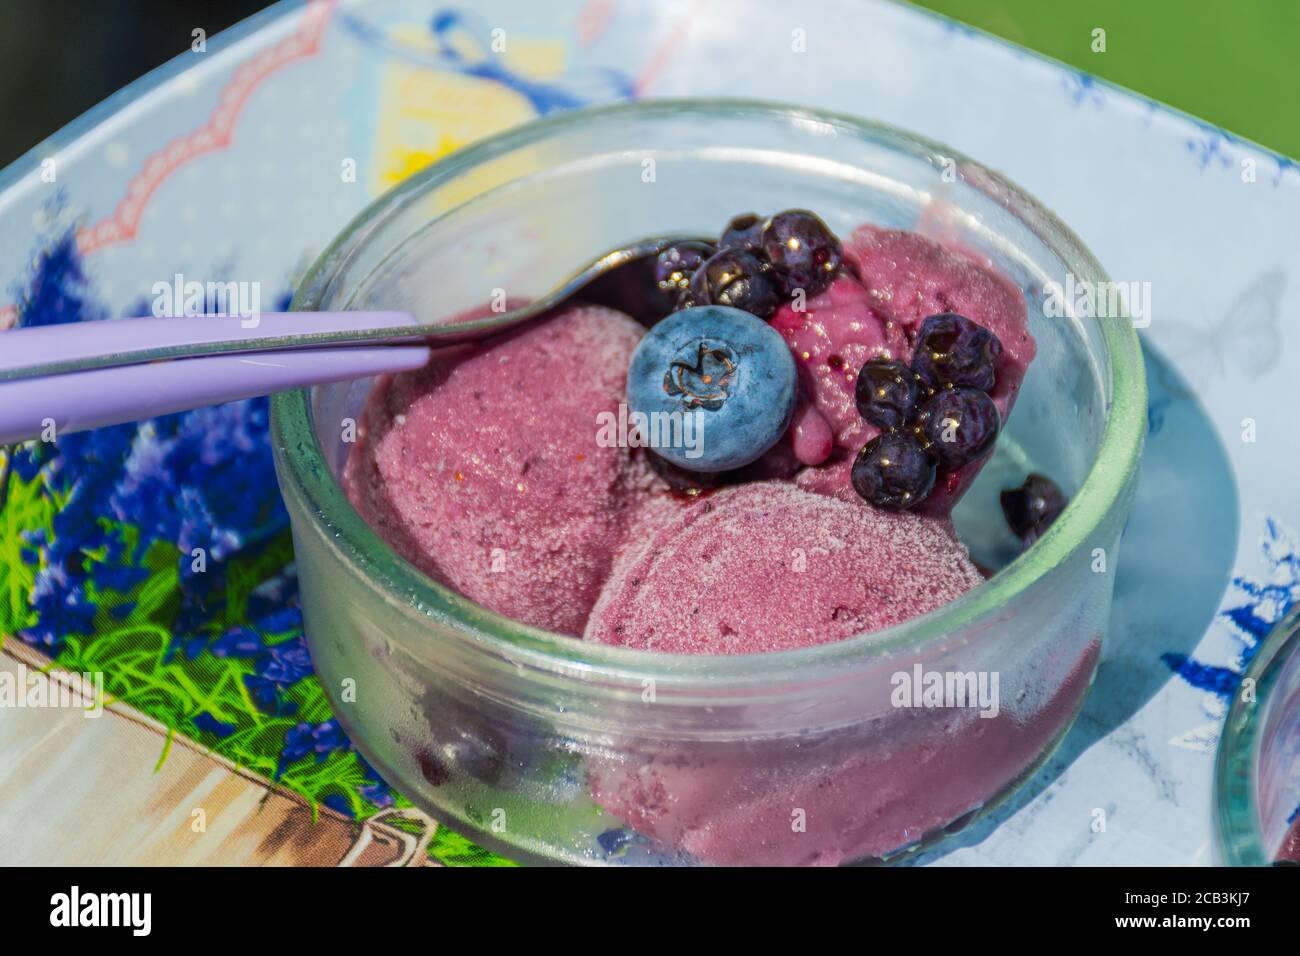 Delicious homemade lavender ice cream in a glass cup with blueberries and wild berries, close up Stock Photo